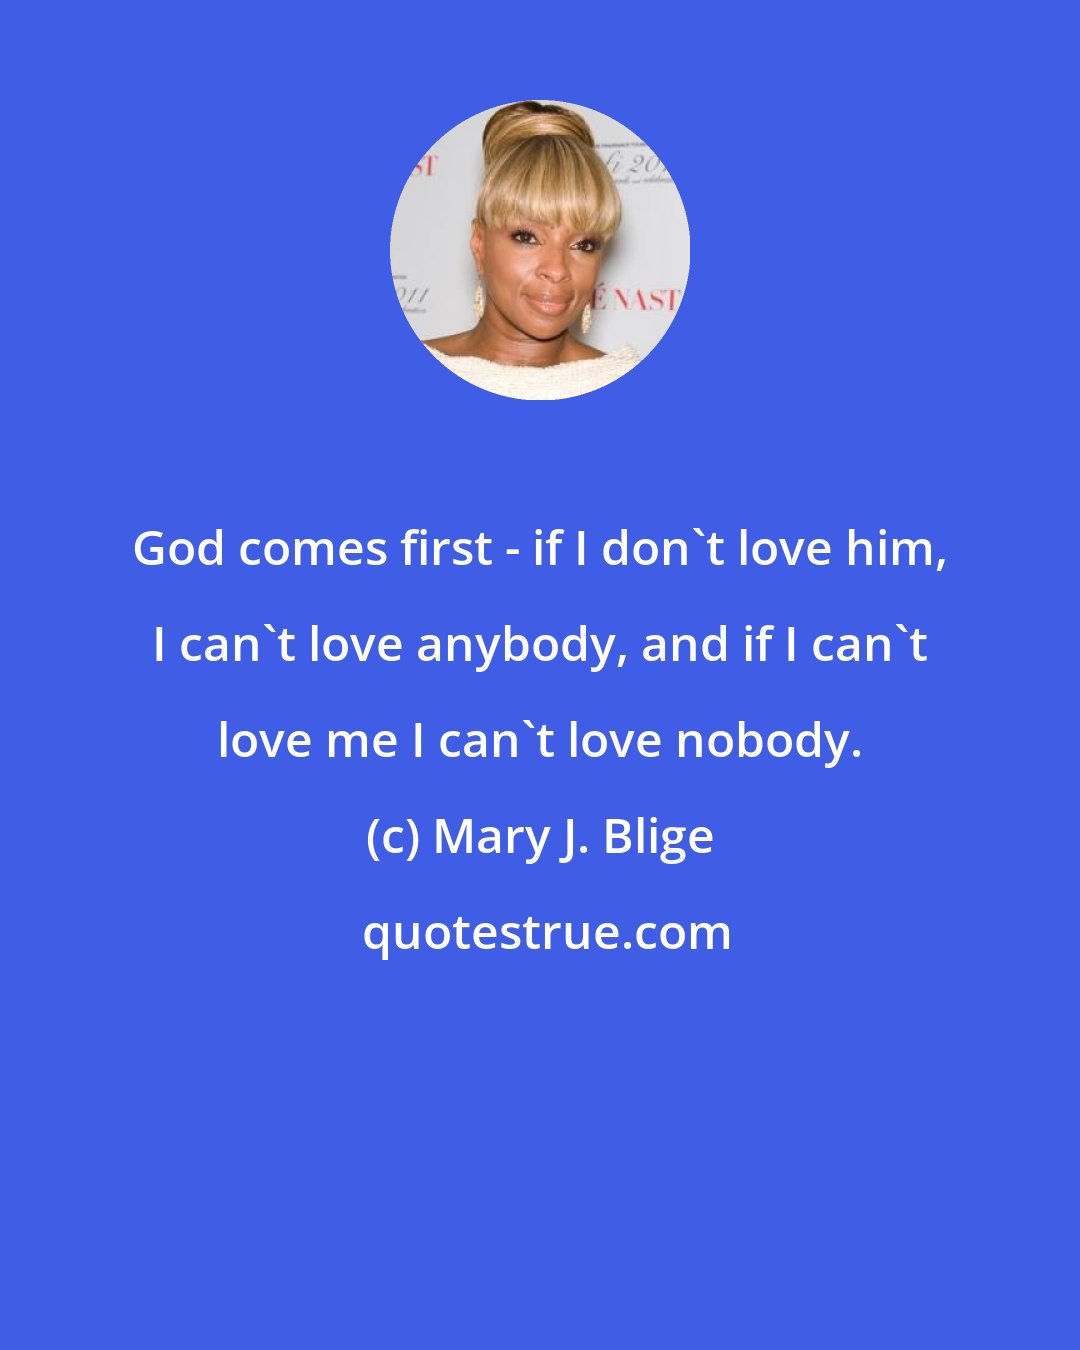 Mary J. Blige: God comes first - if I don't love him, I can't love anybody, and if I can't love me I can't love nobody.